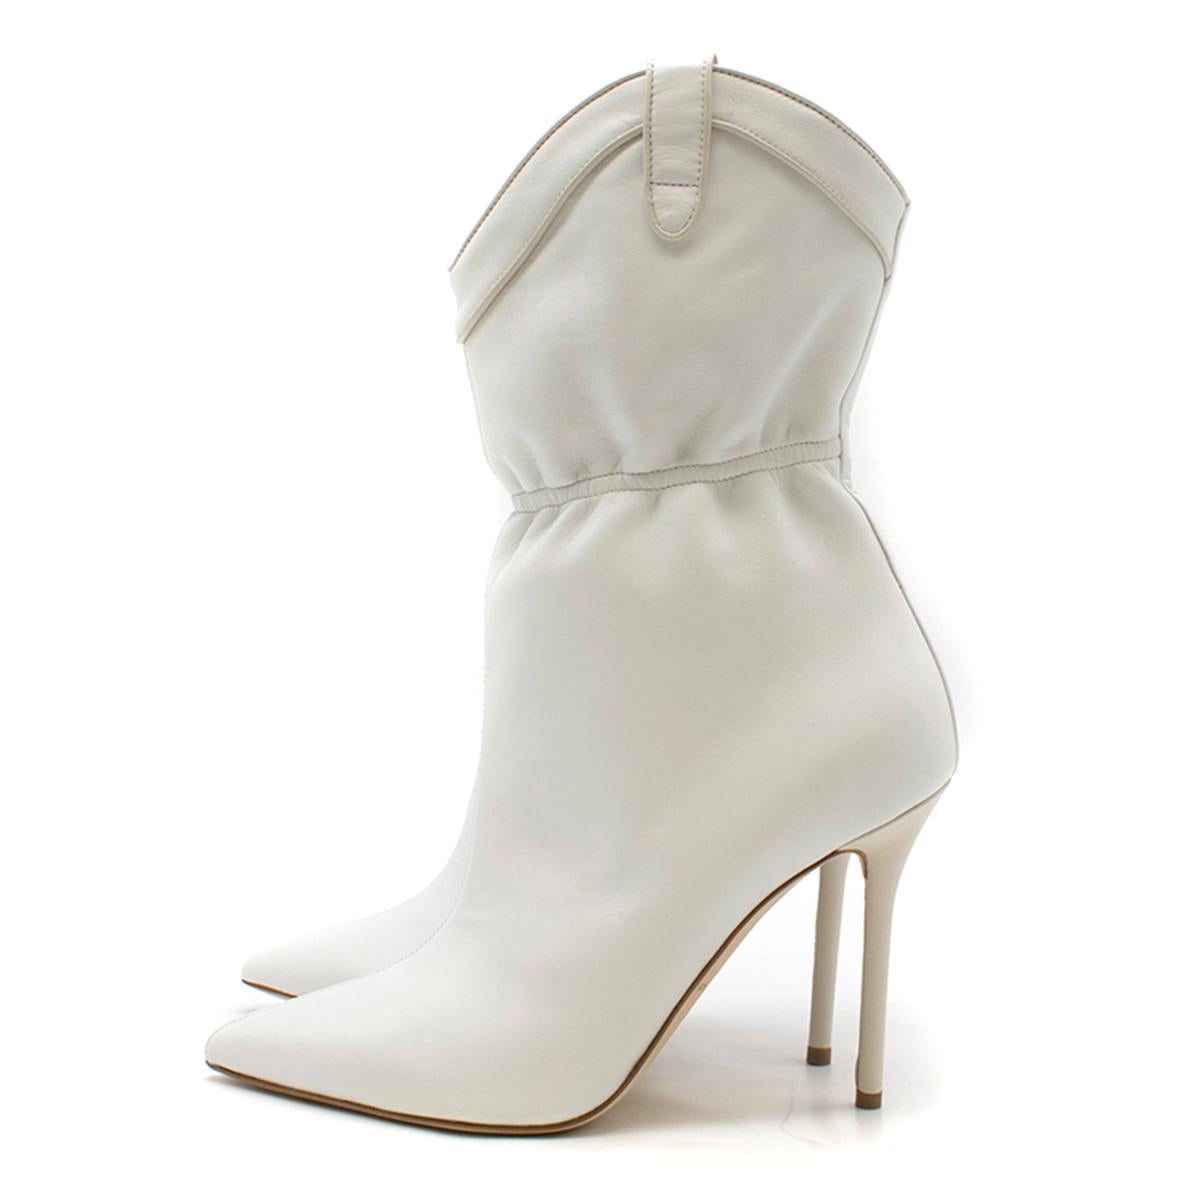 White Malone Souliers Daisy 100 white leather ankle boots - Current Season US 9 For Sale